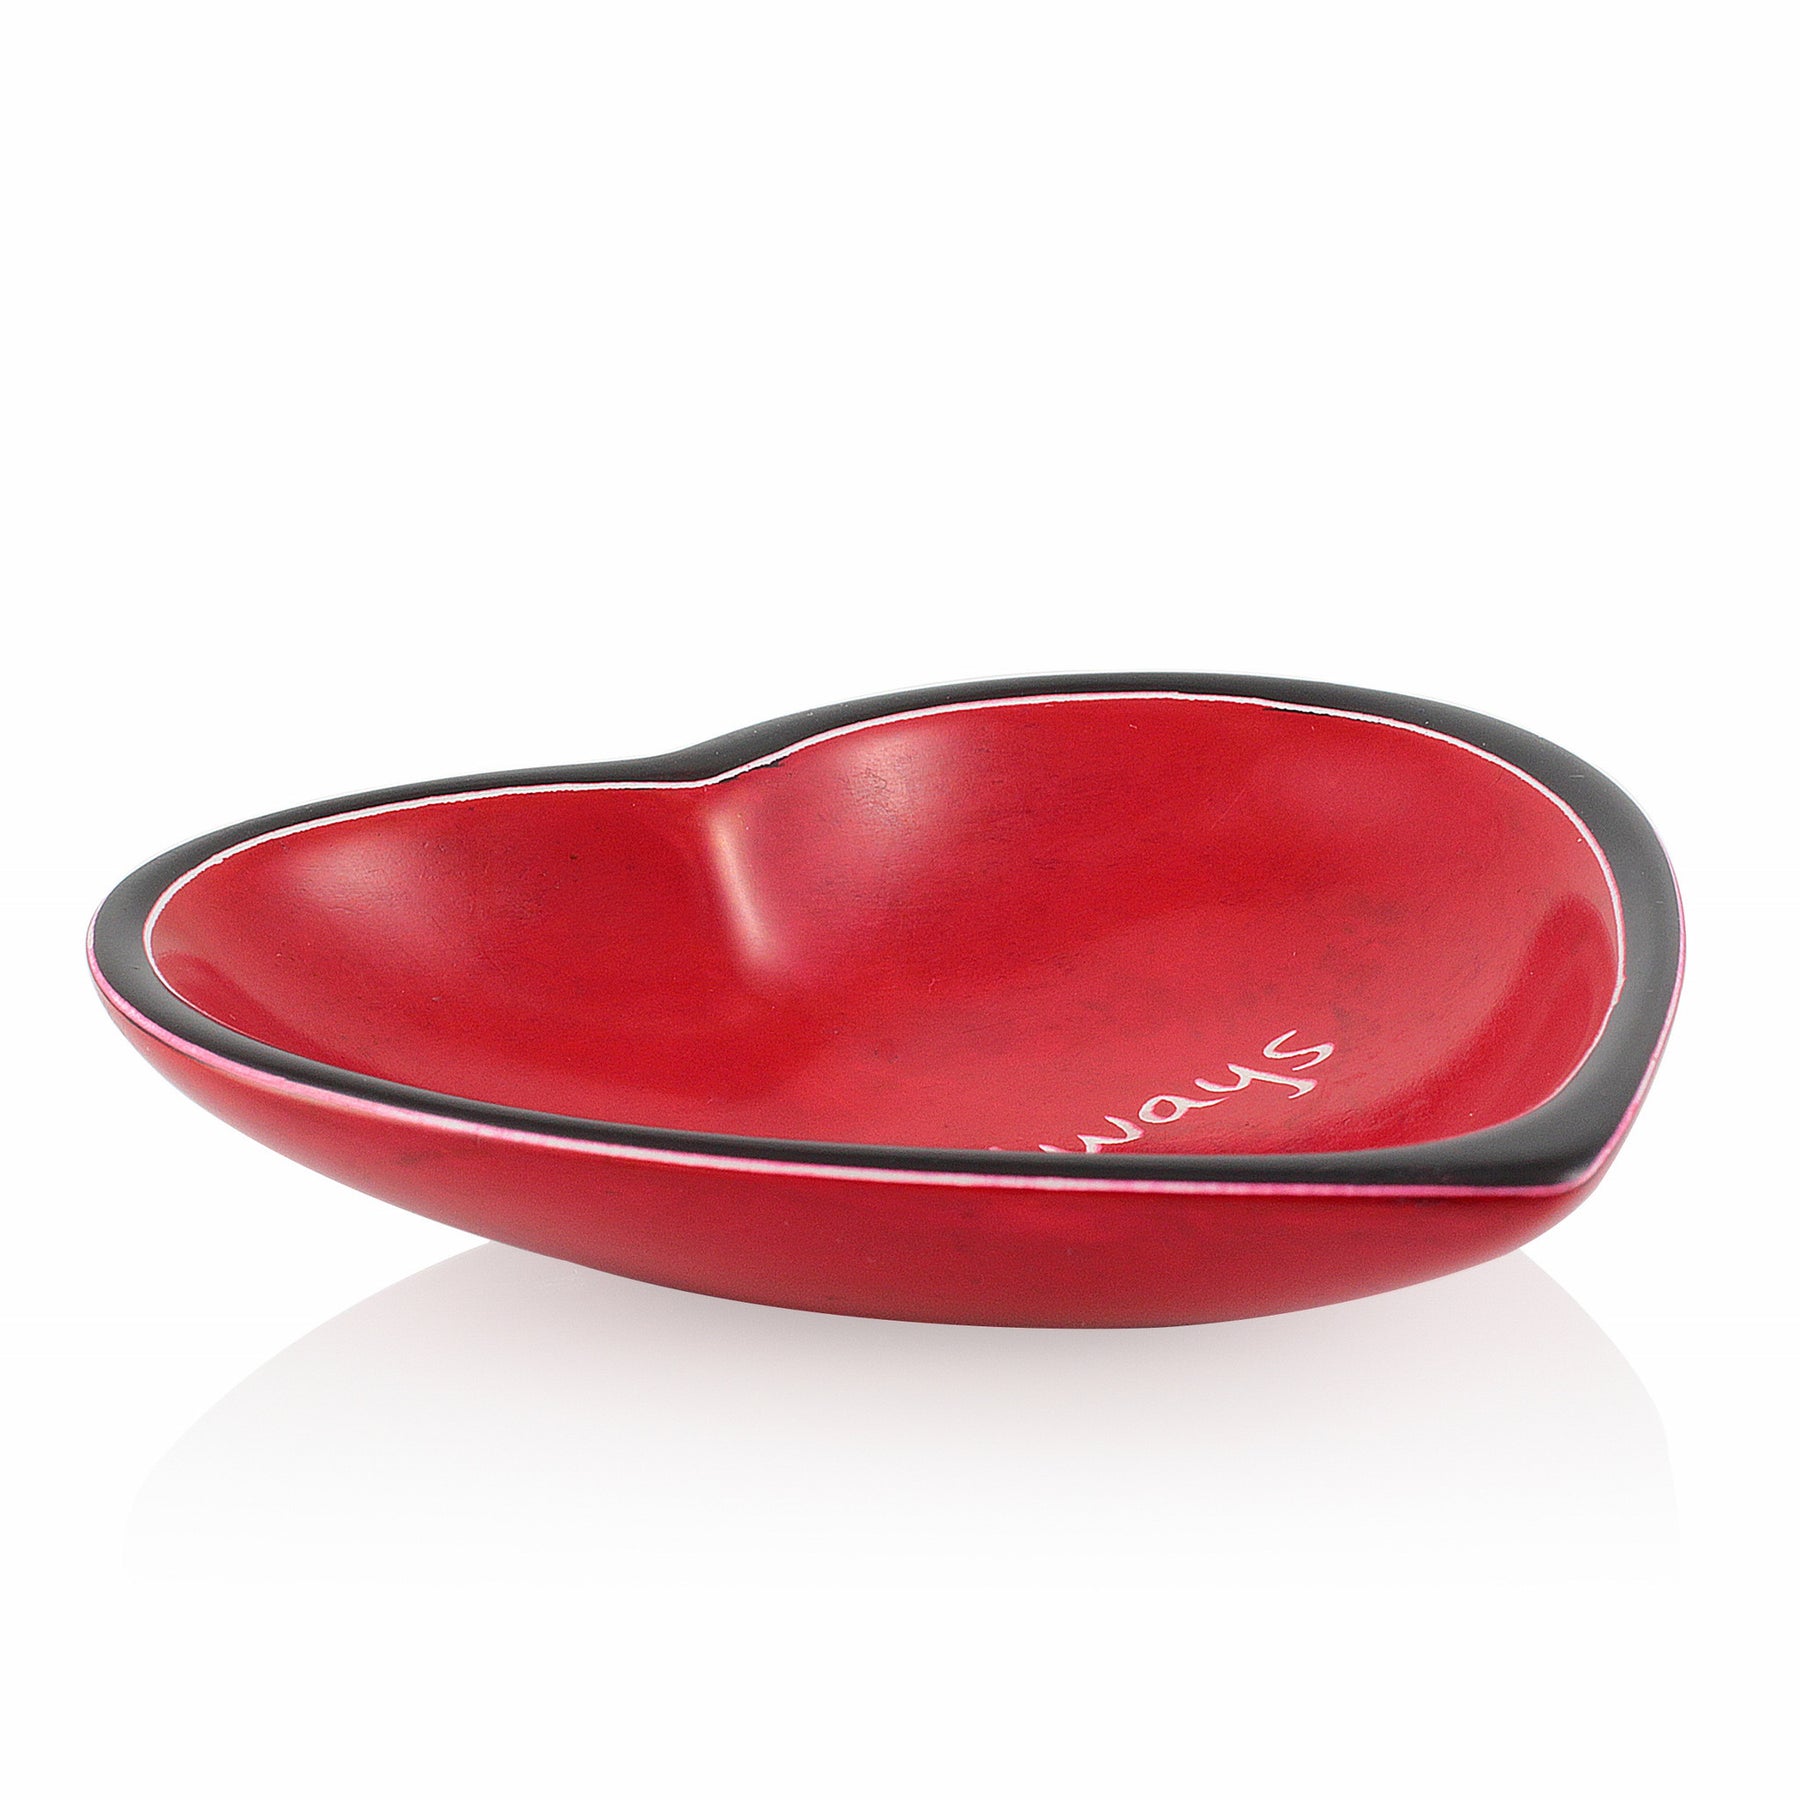 2 of 2: Heart Shaped Dish Side Profile View